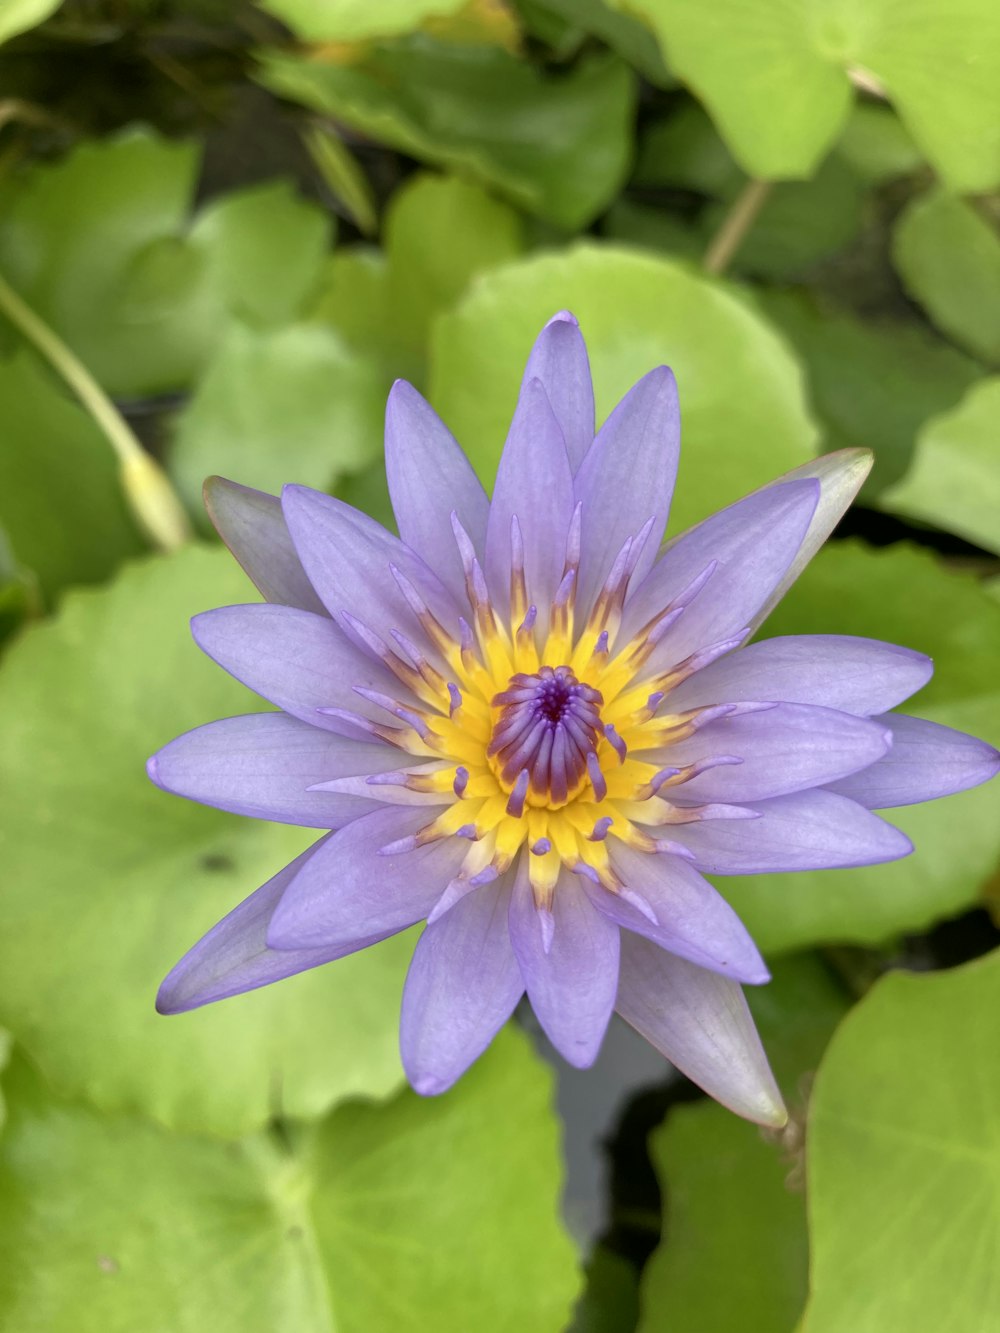 a purple flower with a yellow center surrounded by green leaves